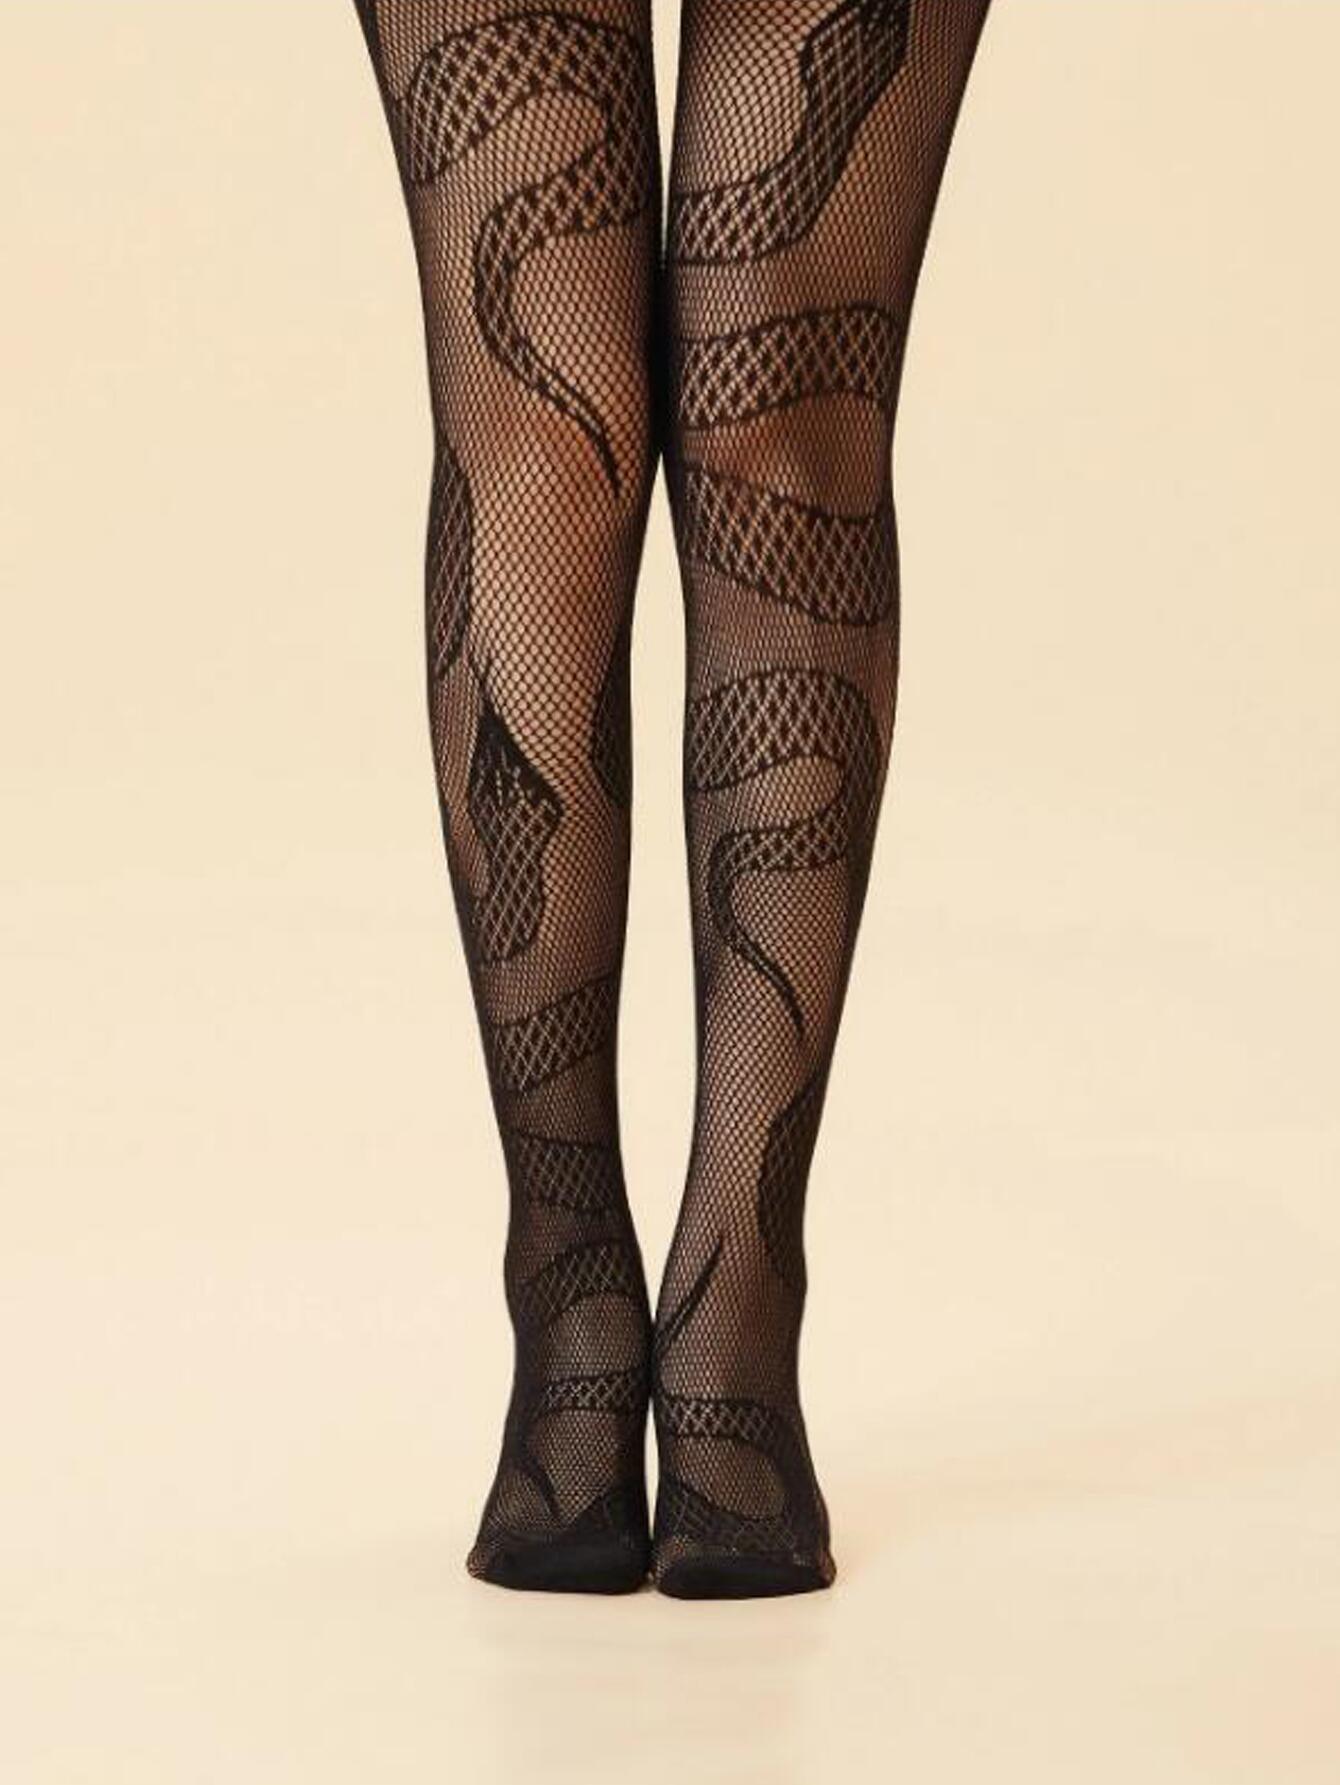 Cut-Out Mesh Women's Stockings with Animal Designs – Fun & Stylish - ForVanity lingerie accessories, Pantyhose & Stockings, women's lingerie Stockings